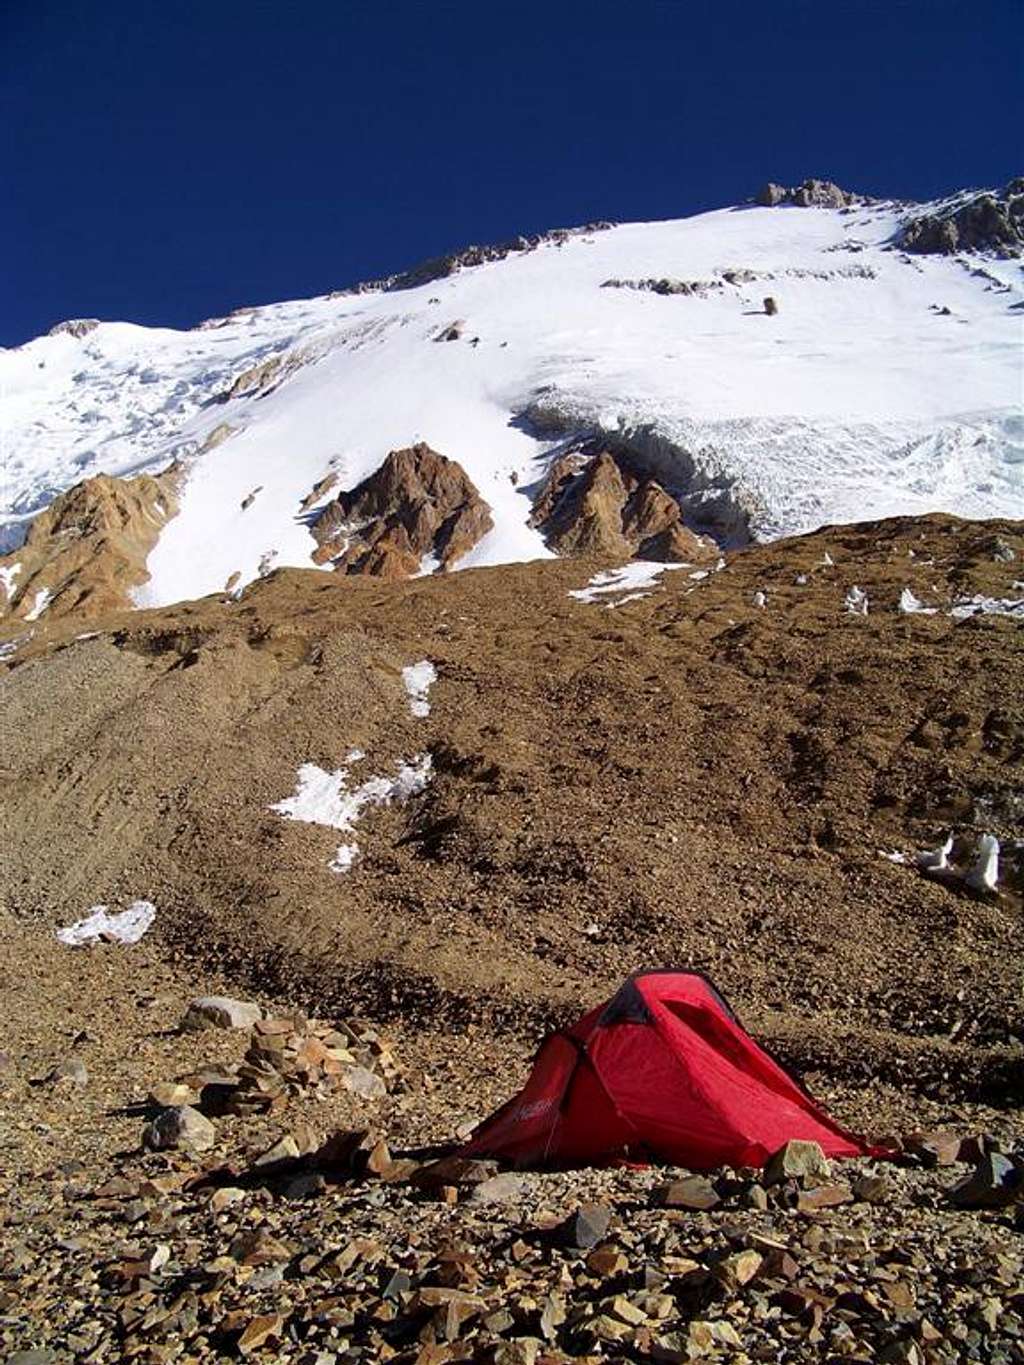 Camp below the South Face